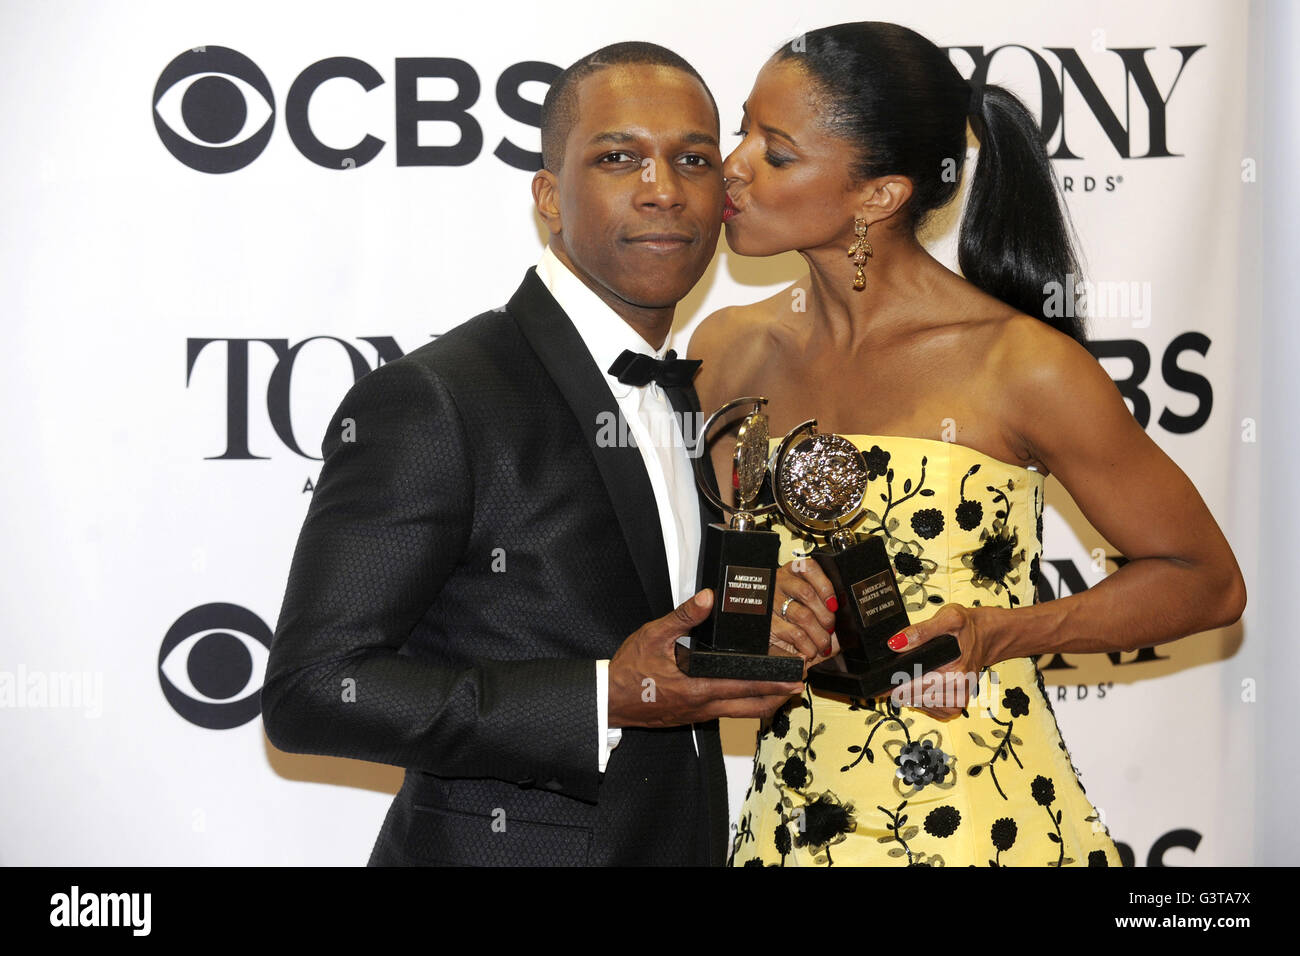 Leslie Odom Jr. and Renee Elise Goldsberry pose with their awards in the press room at the 70th Annual Tony Awards at Beacon Theatre on June 12, 2016 in New York City. | Verwendung weltweit Stock Photo